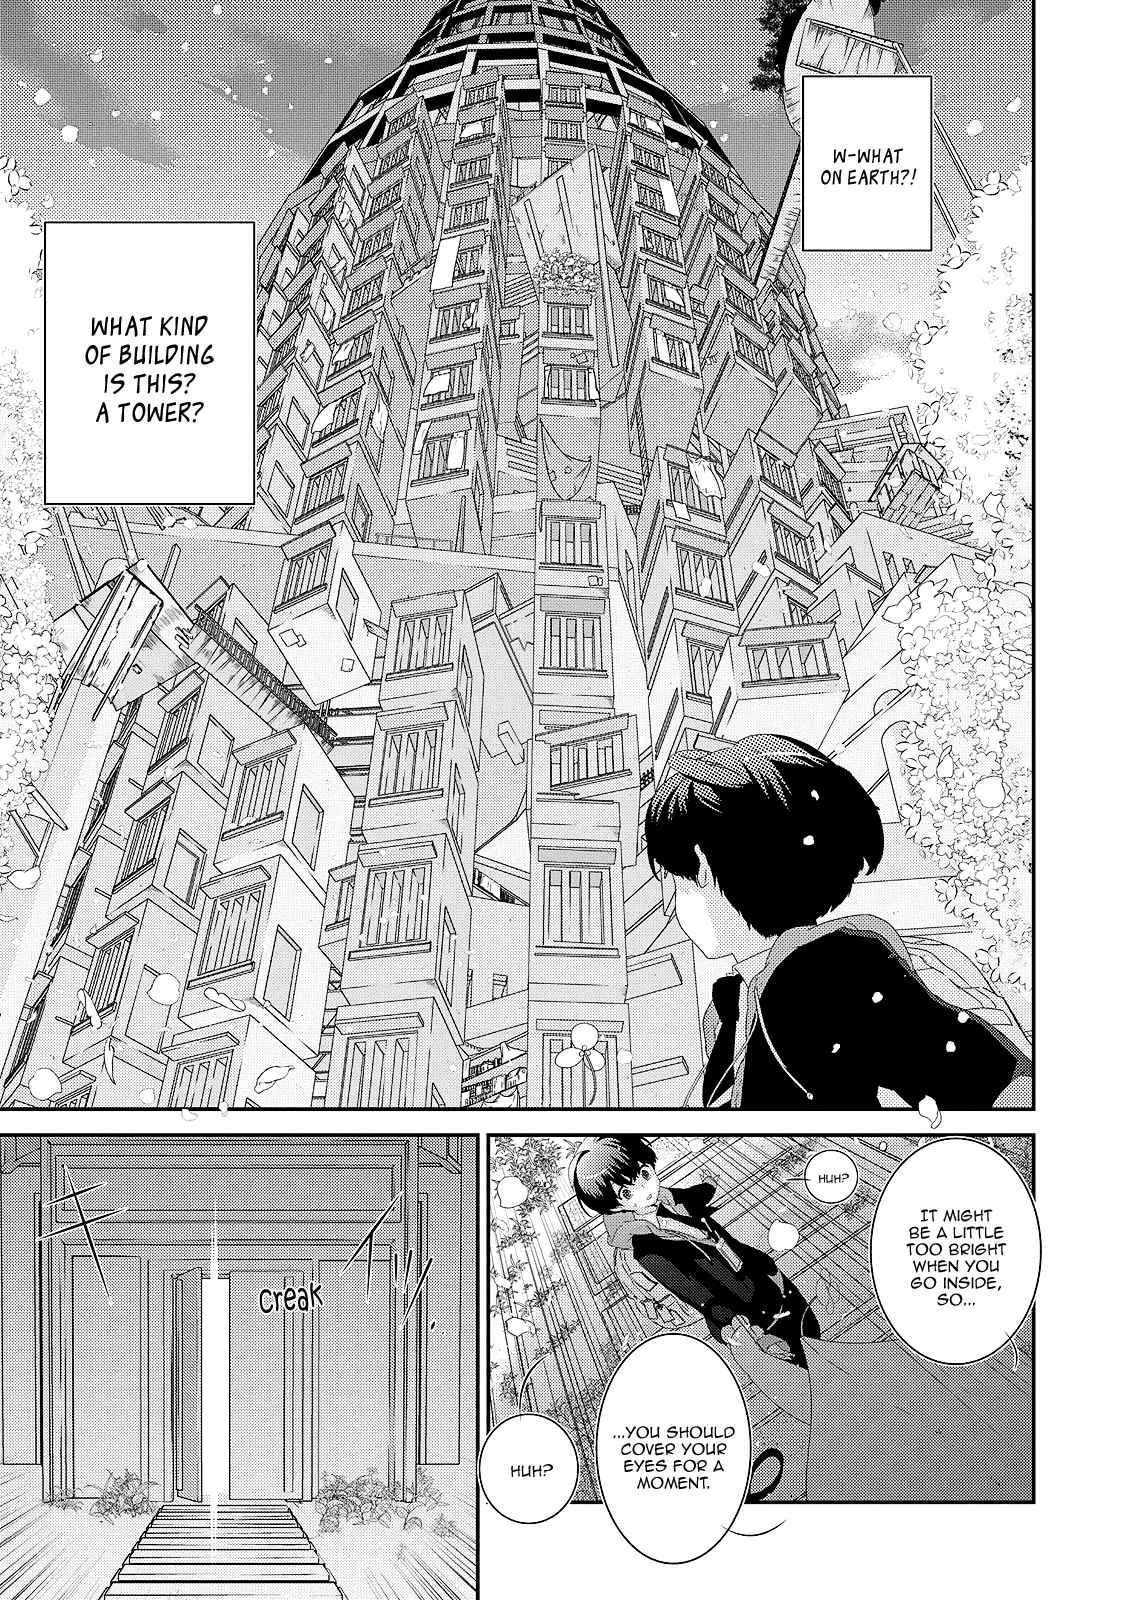 The Female God of Babel: KAMISAMA Club in Tower of Babel Vol. 1 Ch. 1 Welcome to [The Lesser Tower of Clubs]